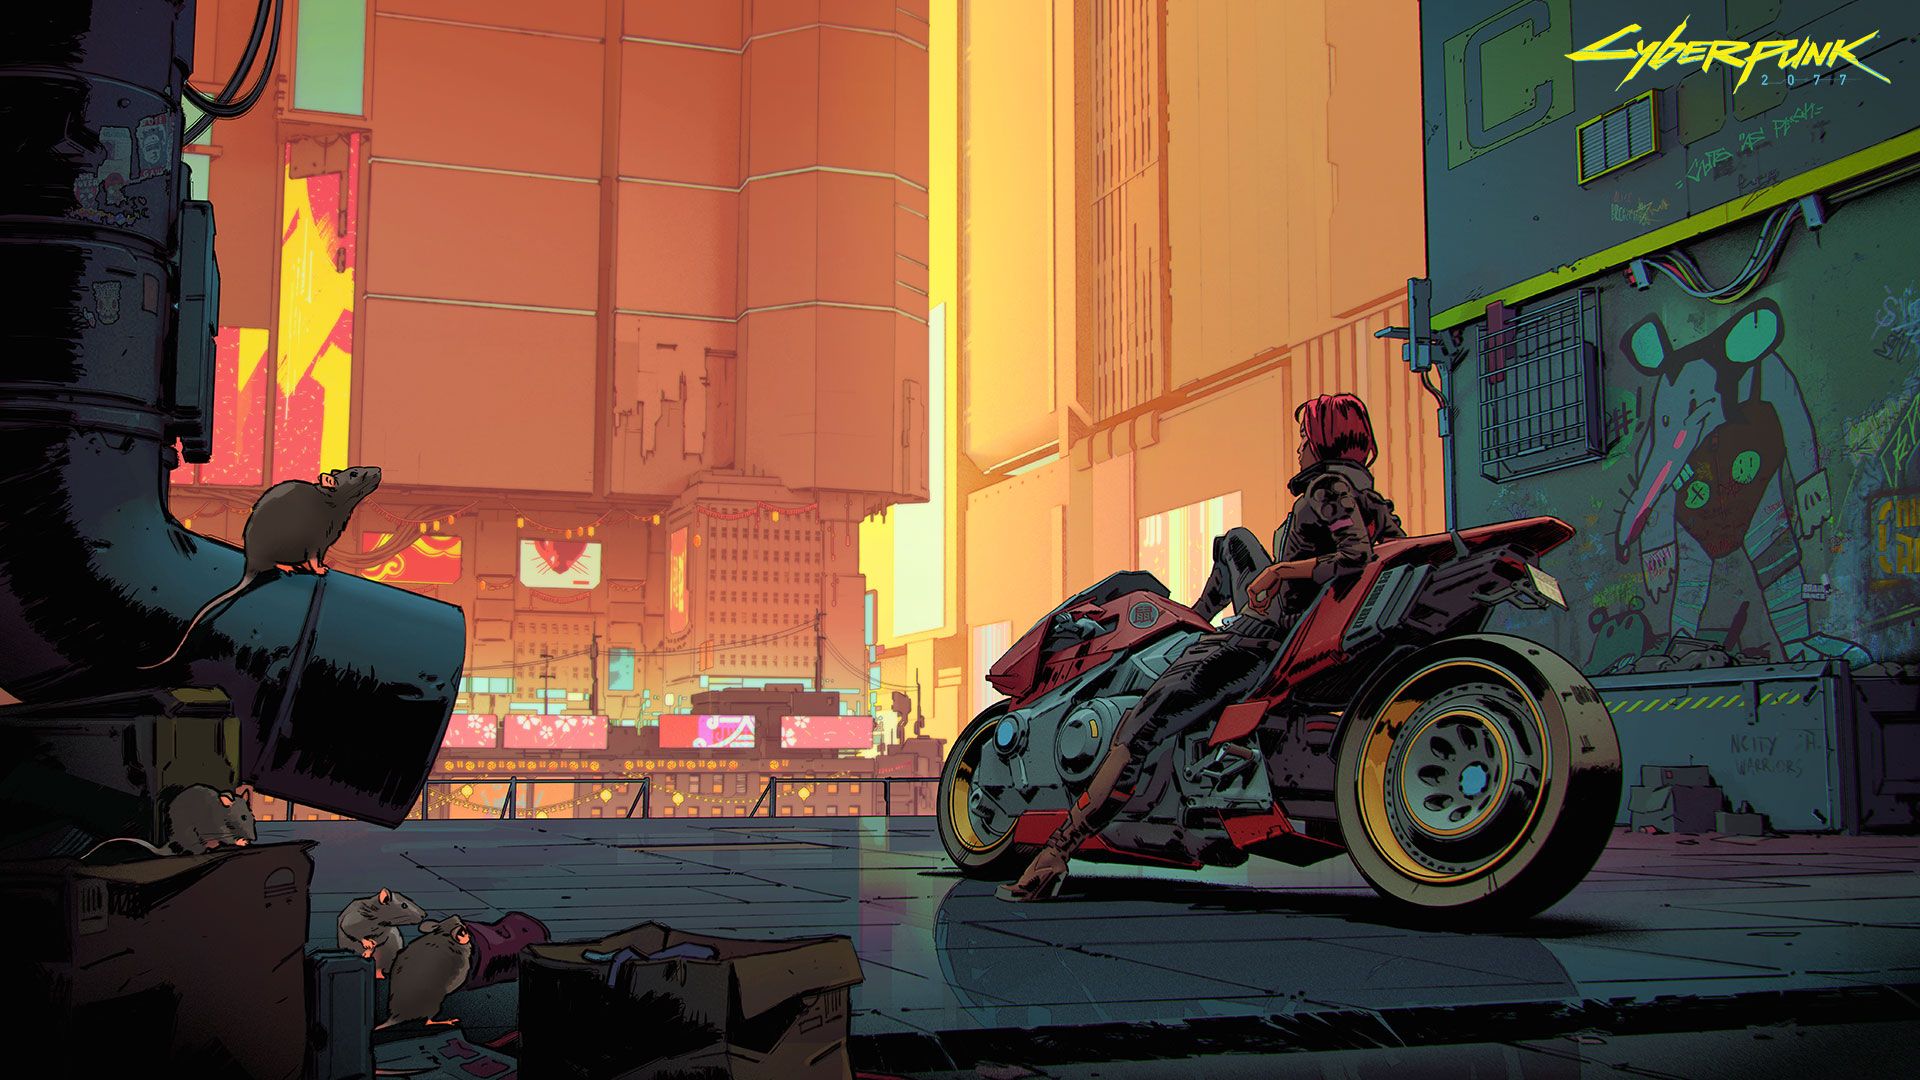 Check out these stunning Cyberpunk 2077 wallpaper